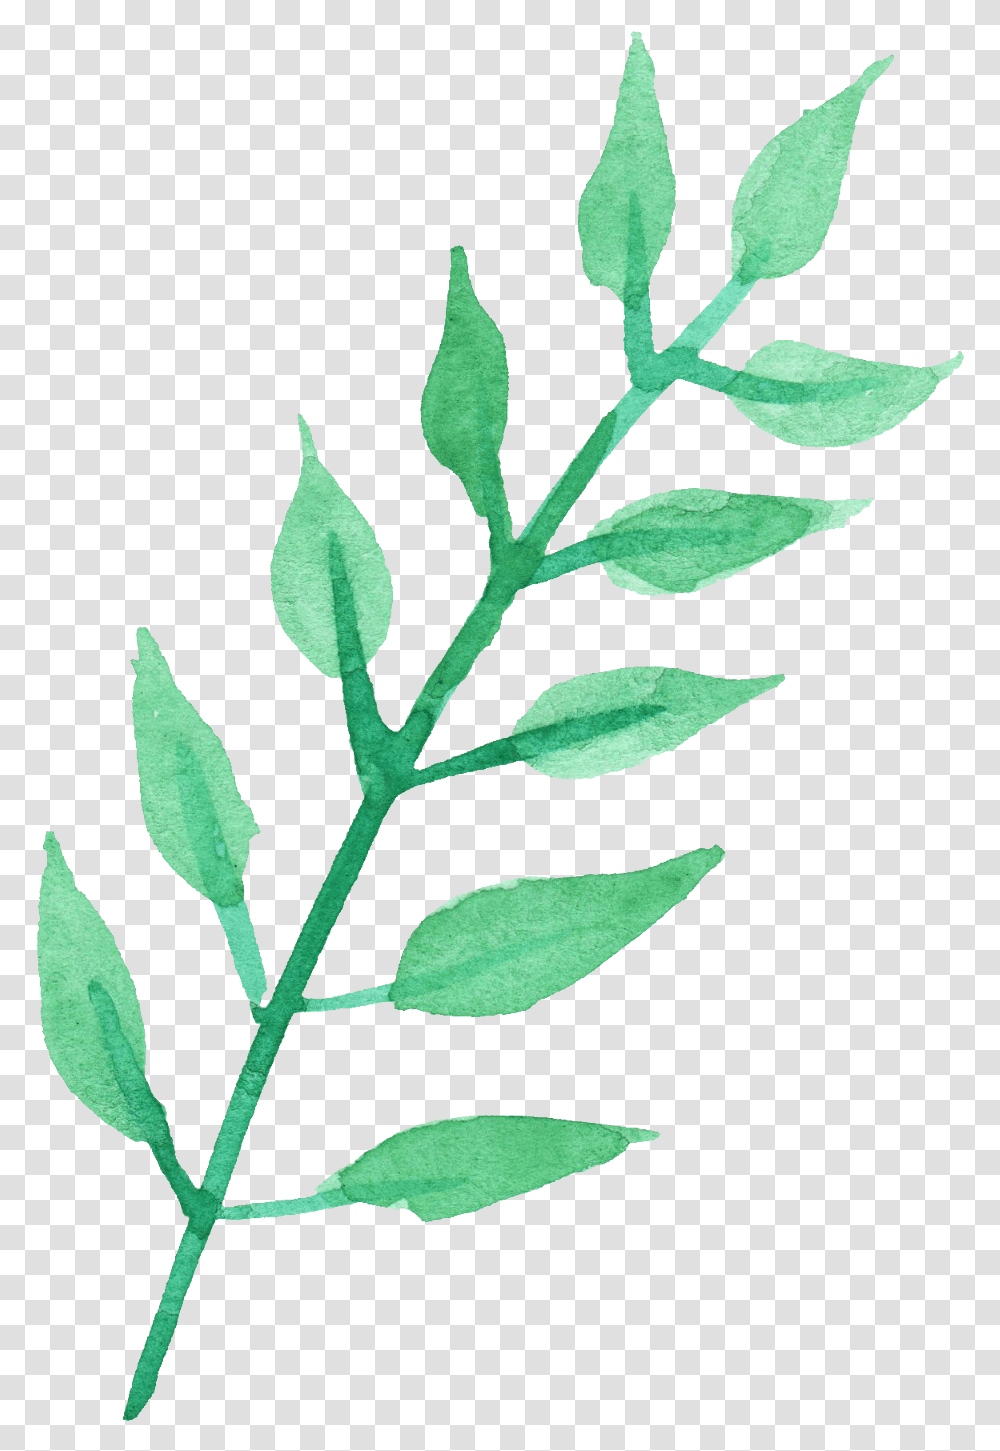 Stem Of A Plant Images Watercolor Leaves Watercolor Leaves Background, Leaf, Acanthaceae, Flower, Blossom Transparent Png